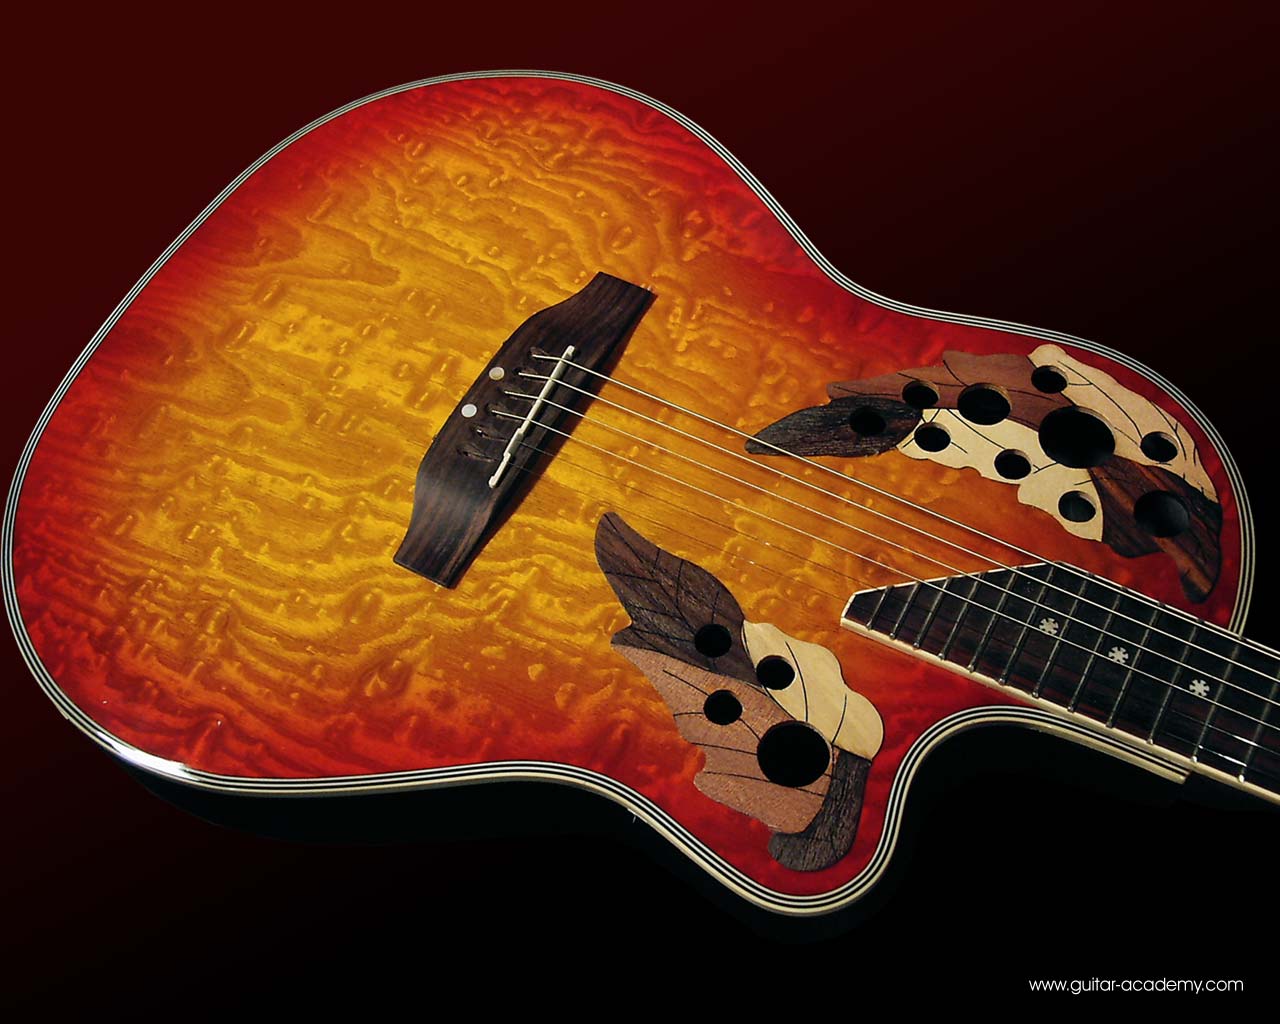 Guitar wallpaper, Ovation style electro acoustic guitar